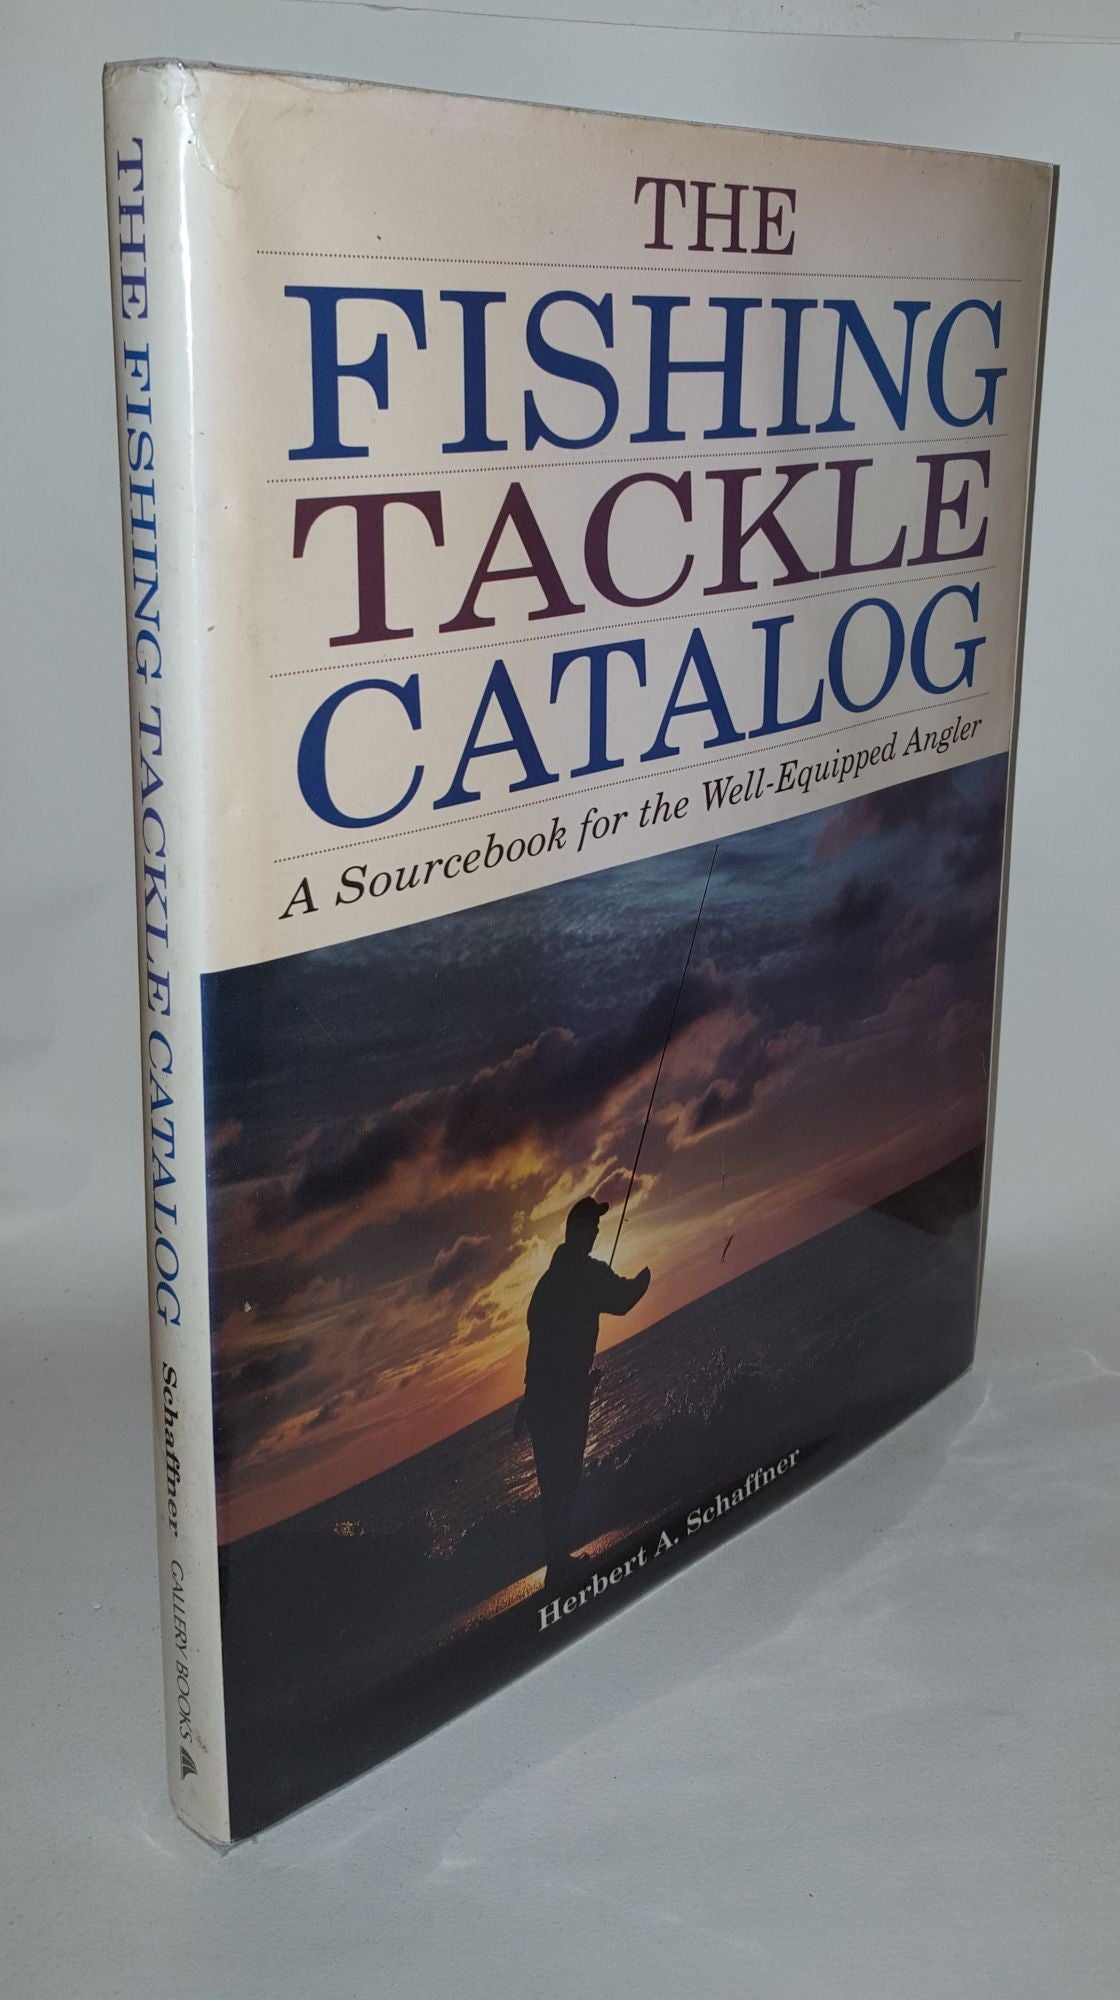 SCHAFFNER Herbert A. - The Fishing Tackle Catalog a Sourcebook for the Well-Equipped Angler